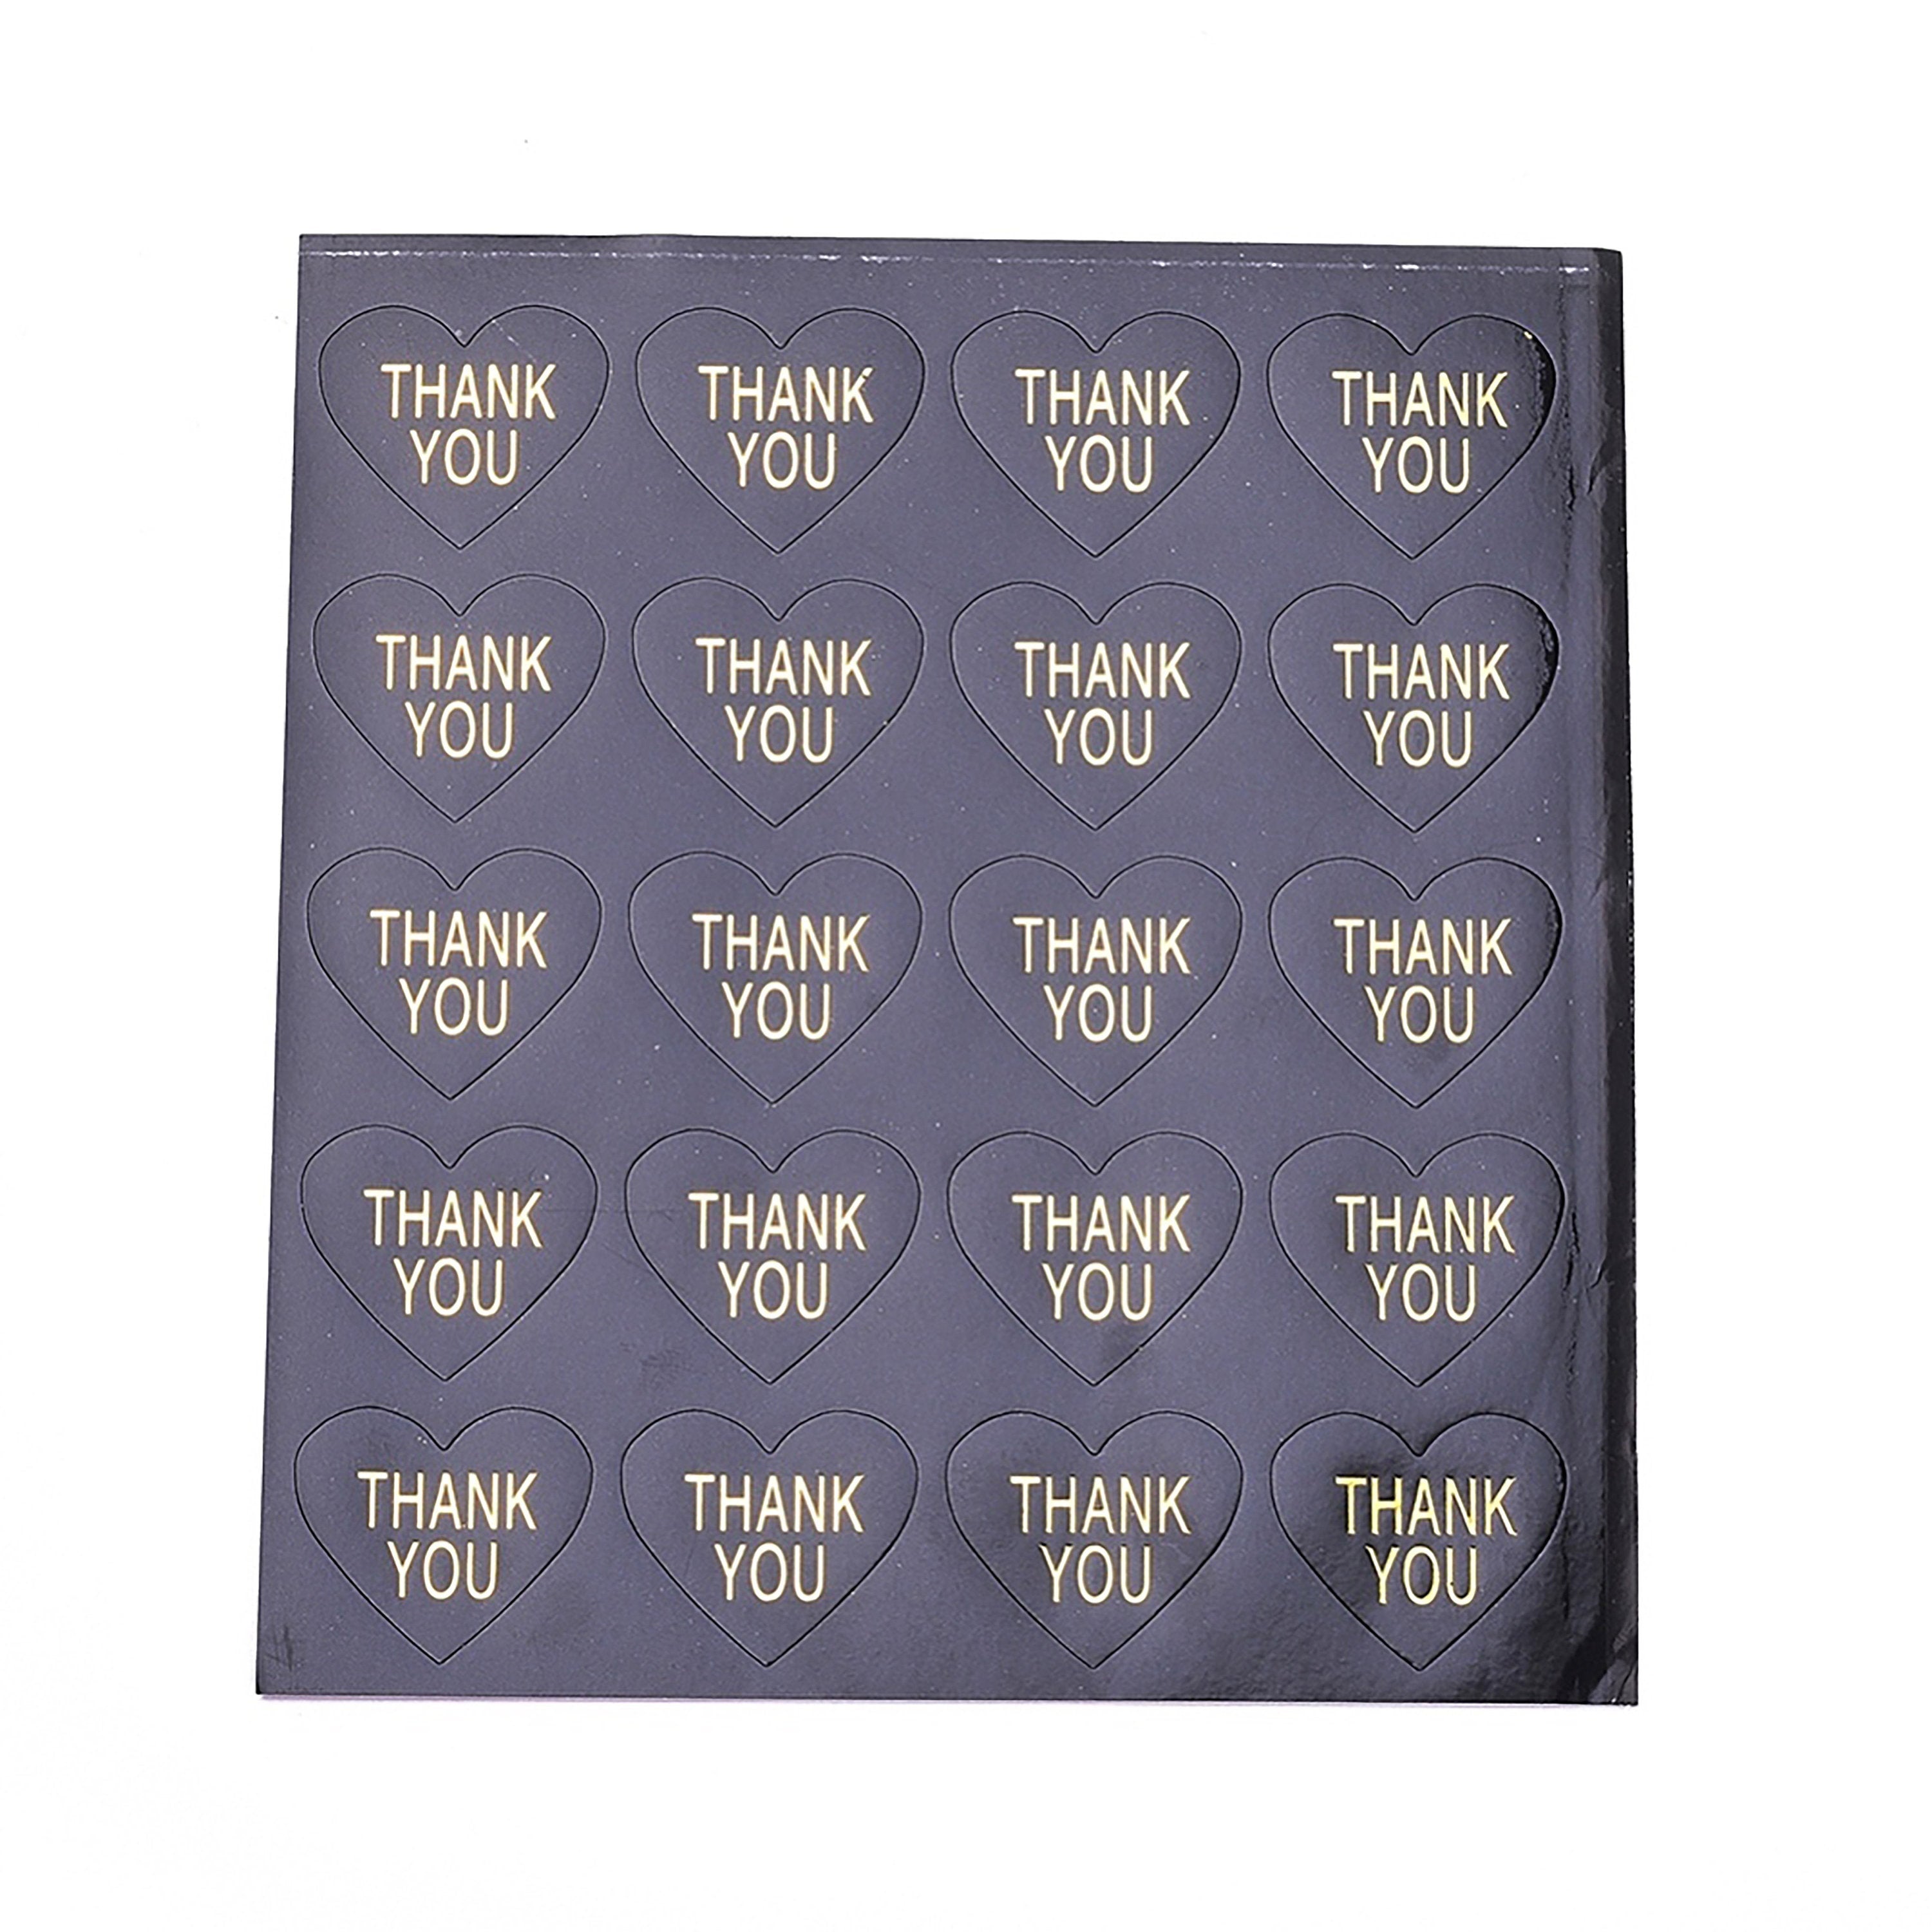 1 Roll (Approx 120pcs sticker ),  28x32mm, Heart Shaped Self Adhesive Thank You Sticker in Black